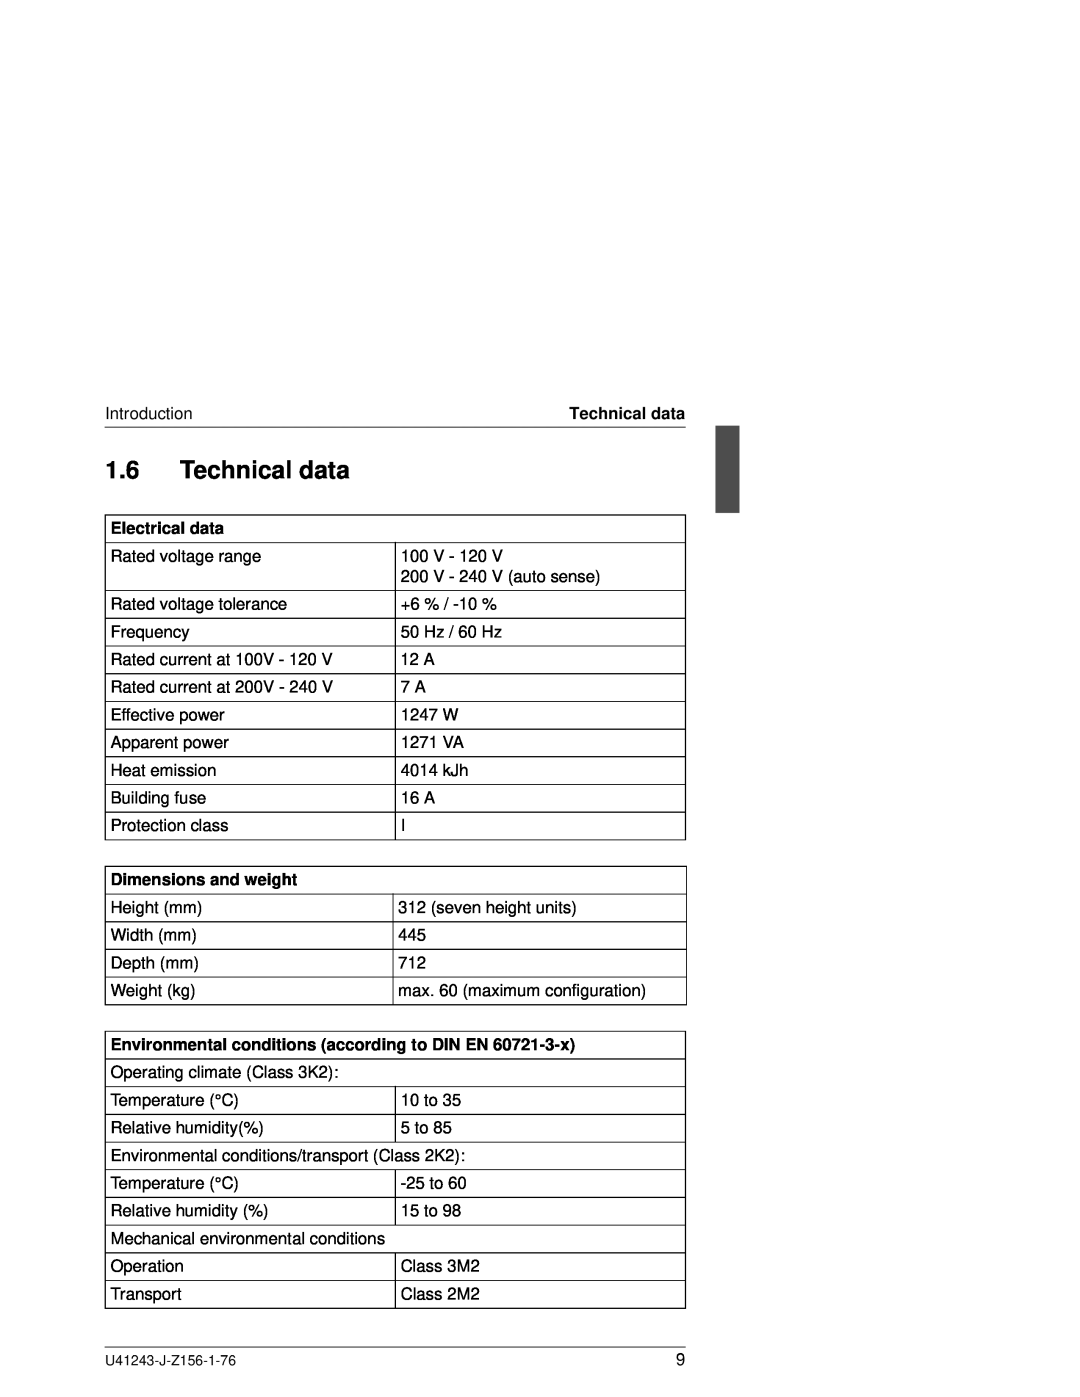 Fujitsu N800 manual Technical data, Electrical data, Dimensions and weight, Environmental conditions according to DIN EN 